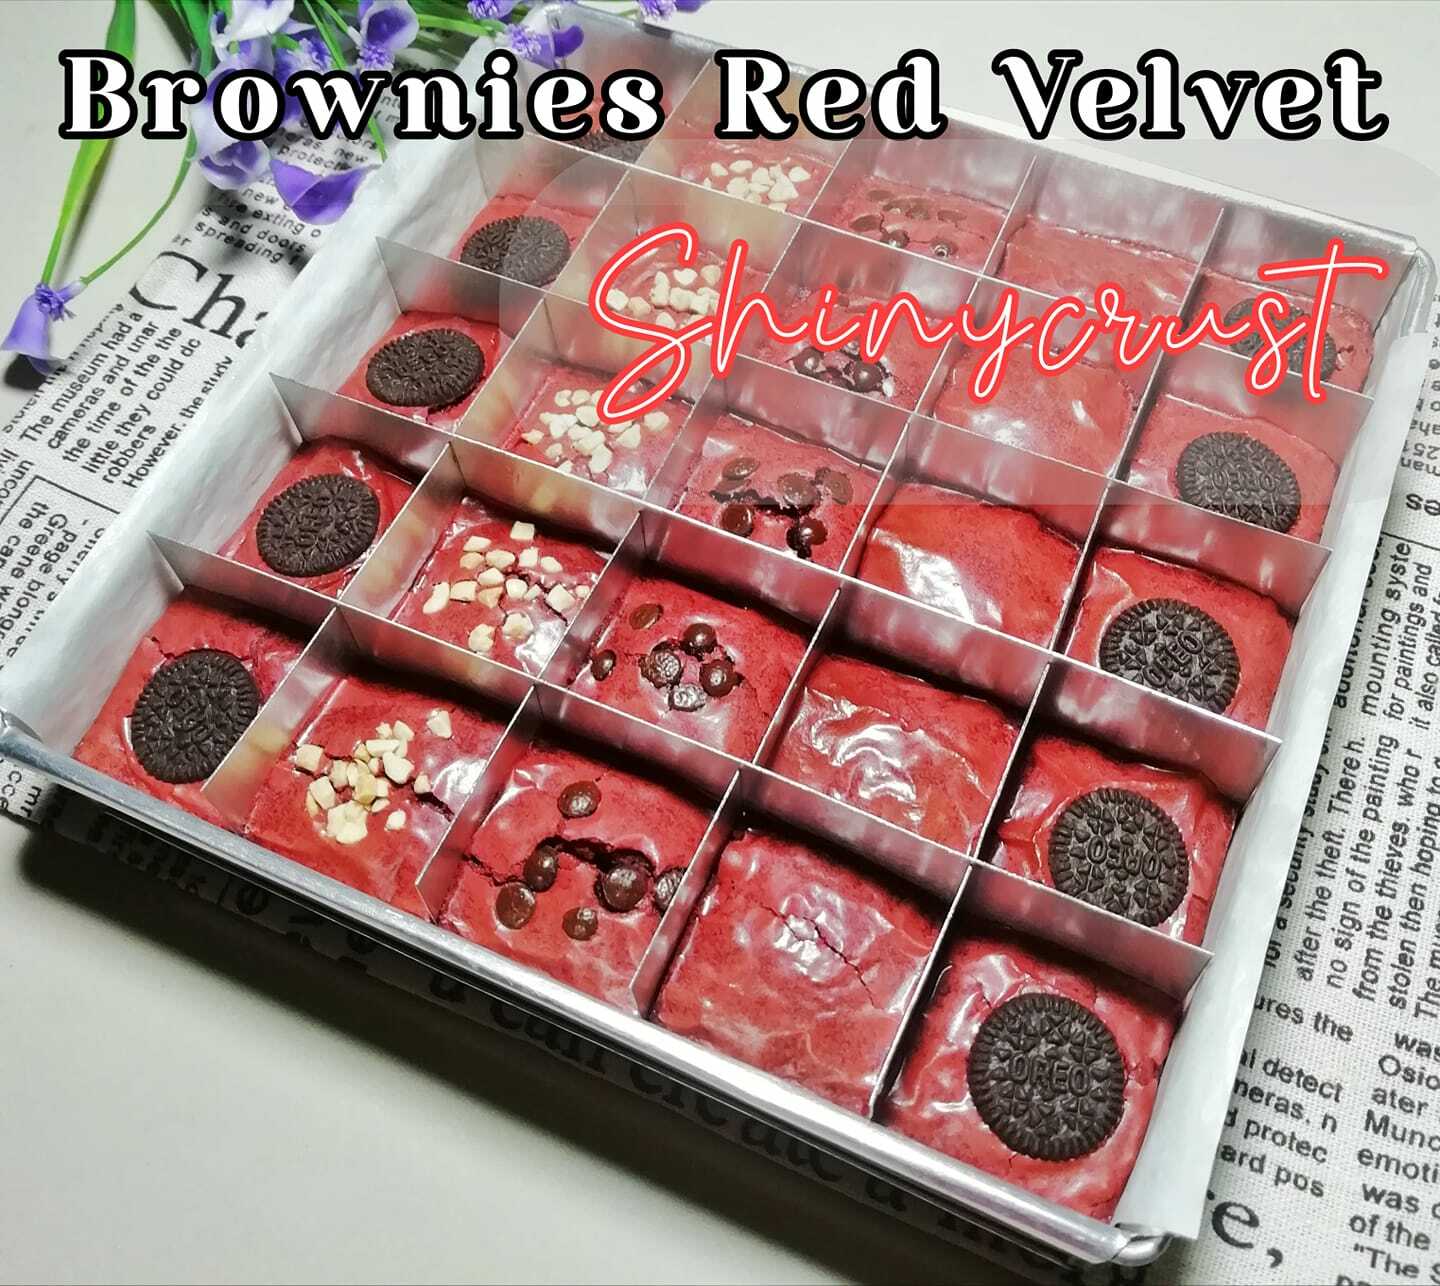 Brownies Red Velvet Shinycrust by Amy ReRe